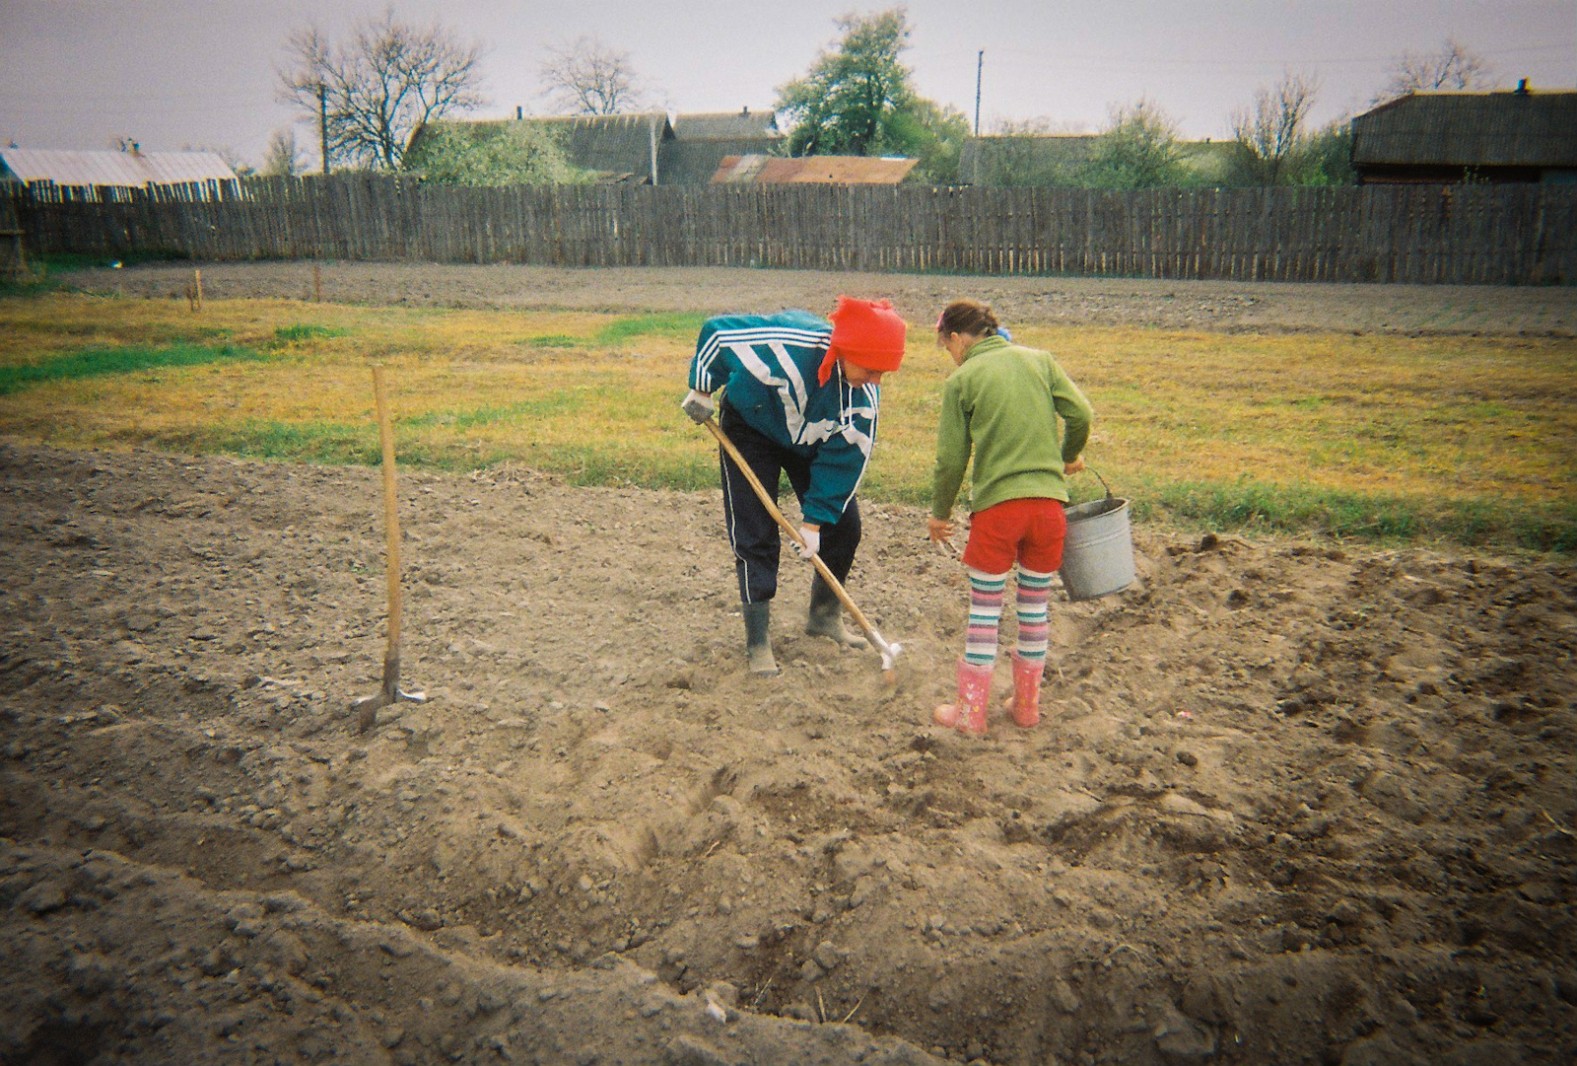 A mother and her daighter plant potatoes during April, the same month that Chernobyl polluted this landscape almost thirty years earlier